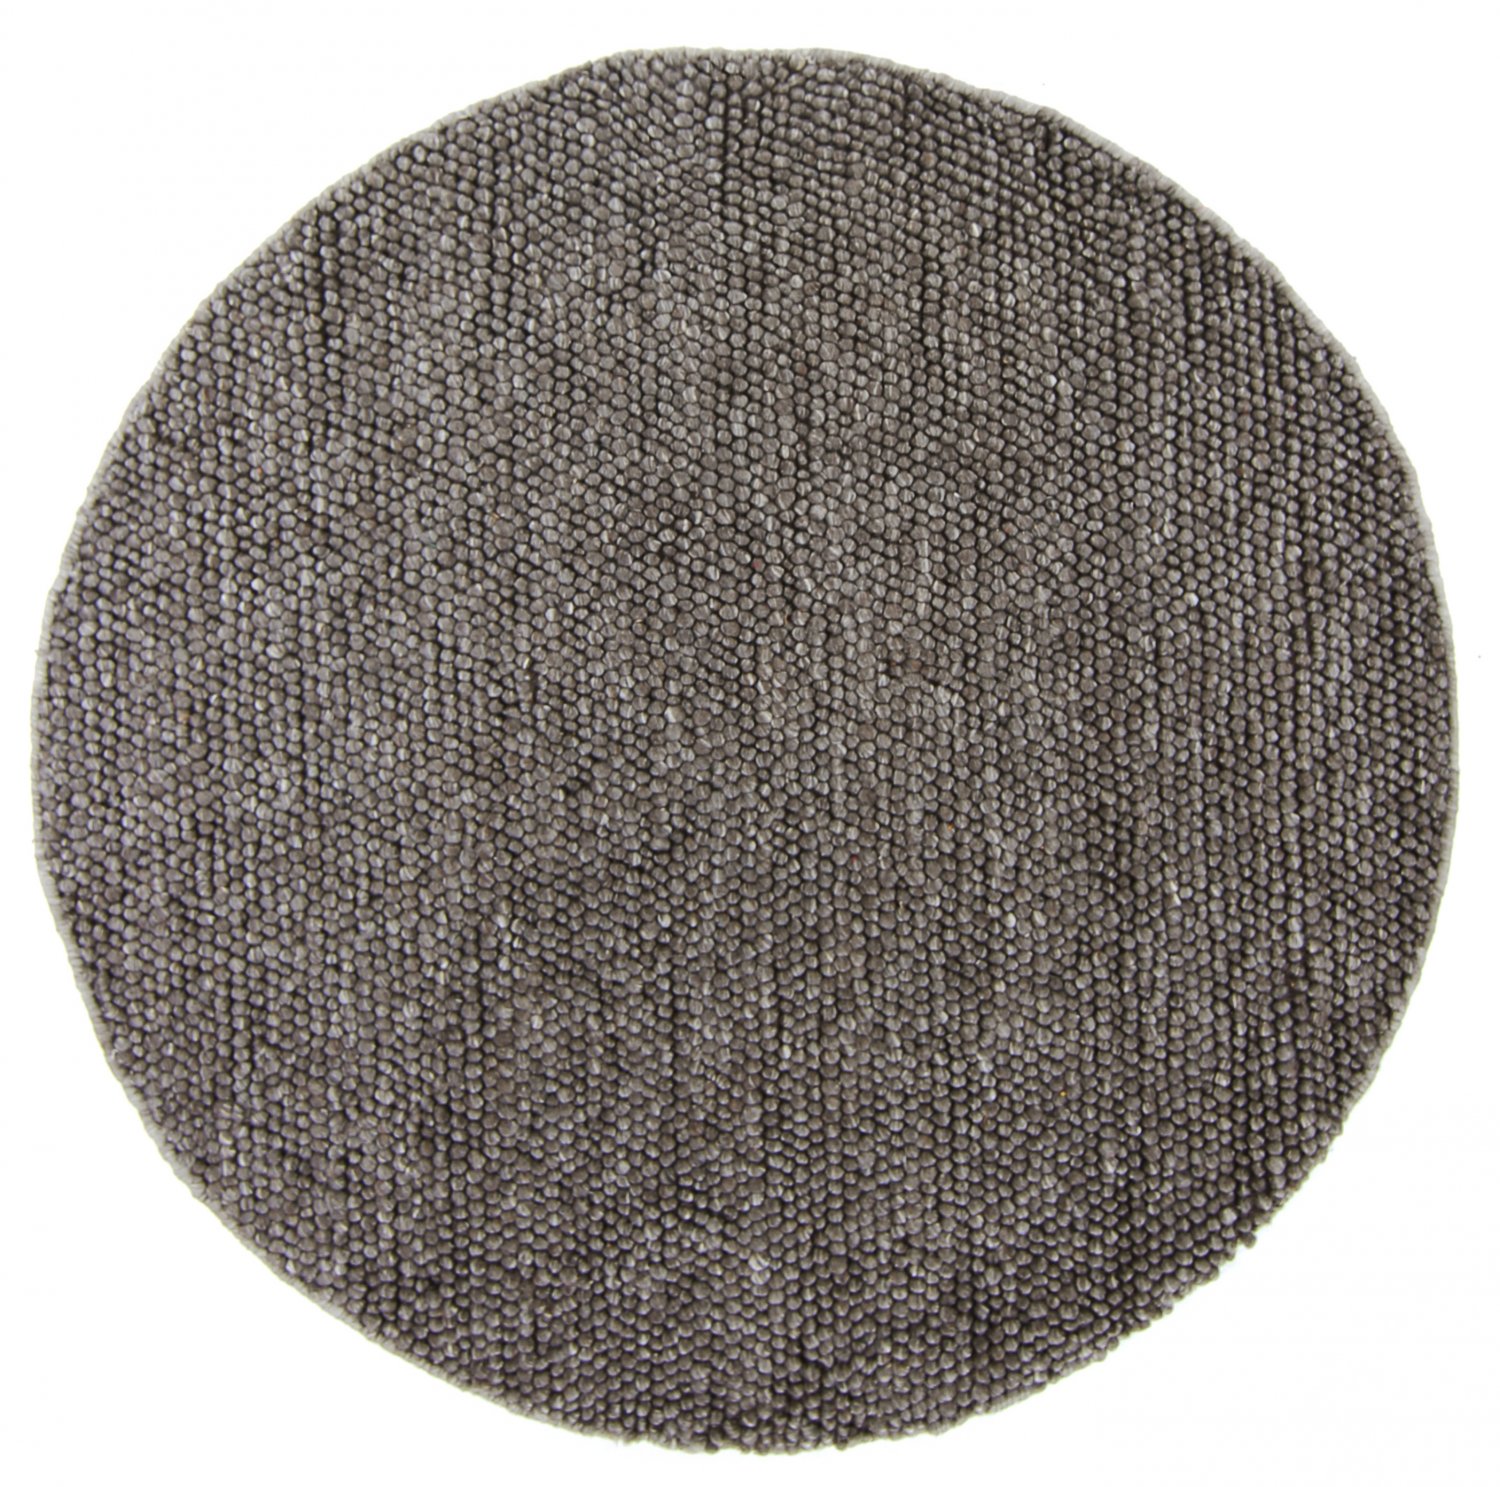 Round rug - Avafors Wool Bubble (antracit)